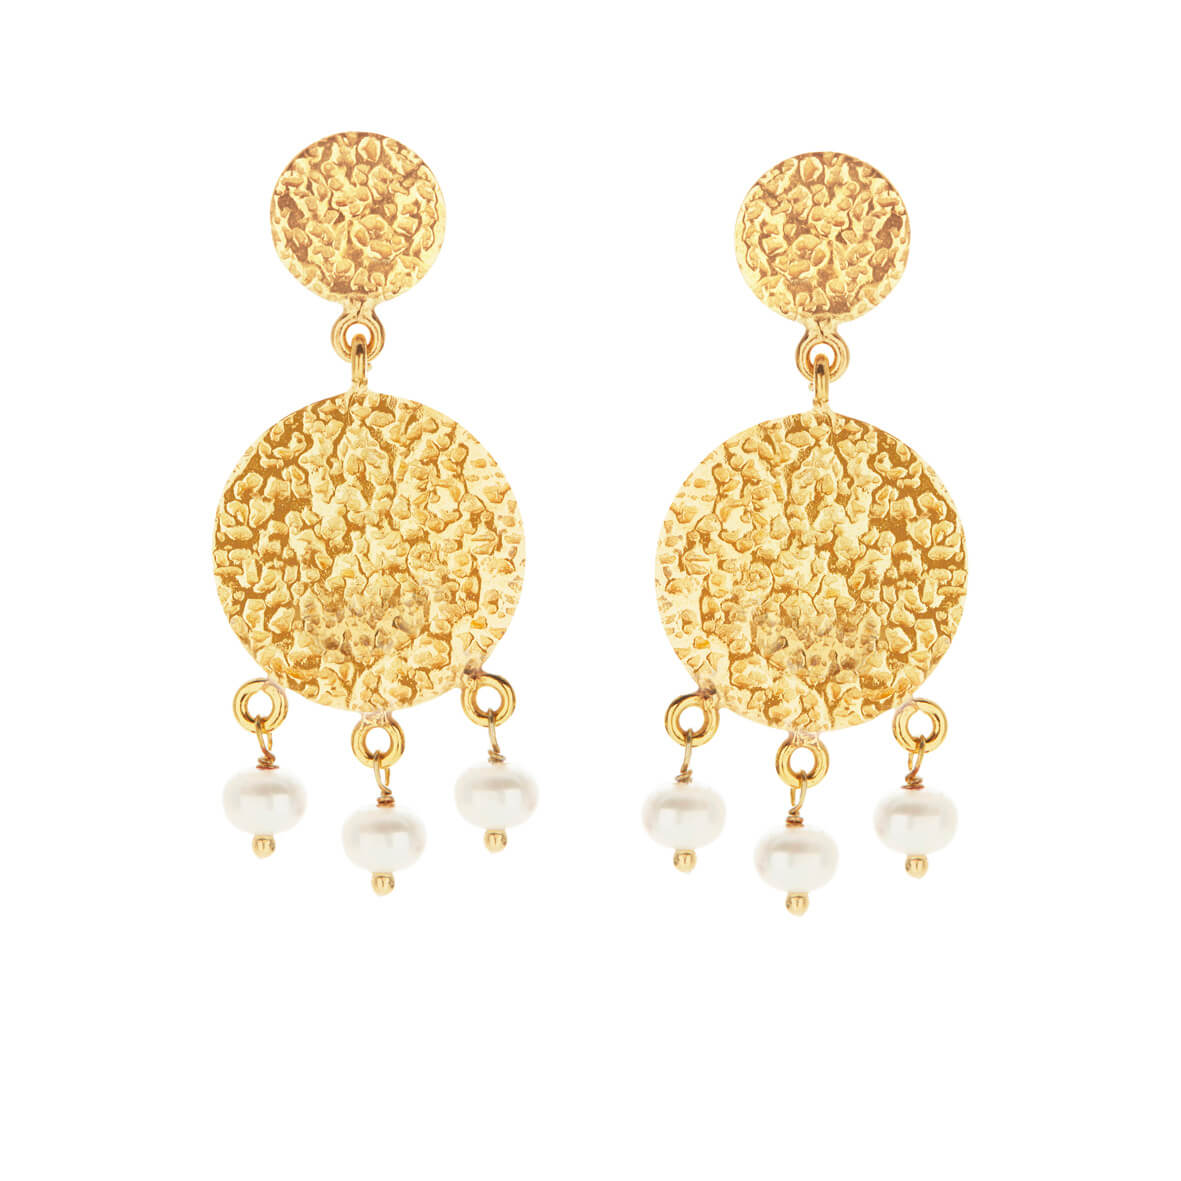 Earrings in gold plated silver with pearls - Susanne Friis Bjørner ...